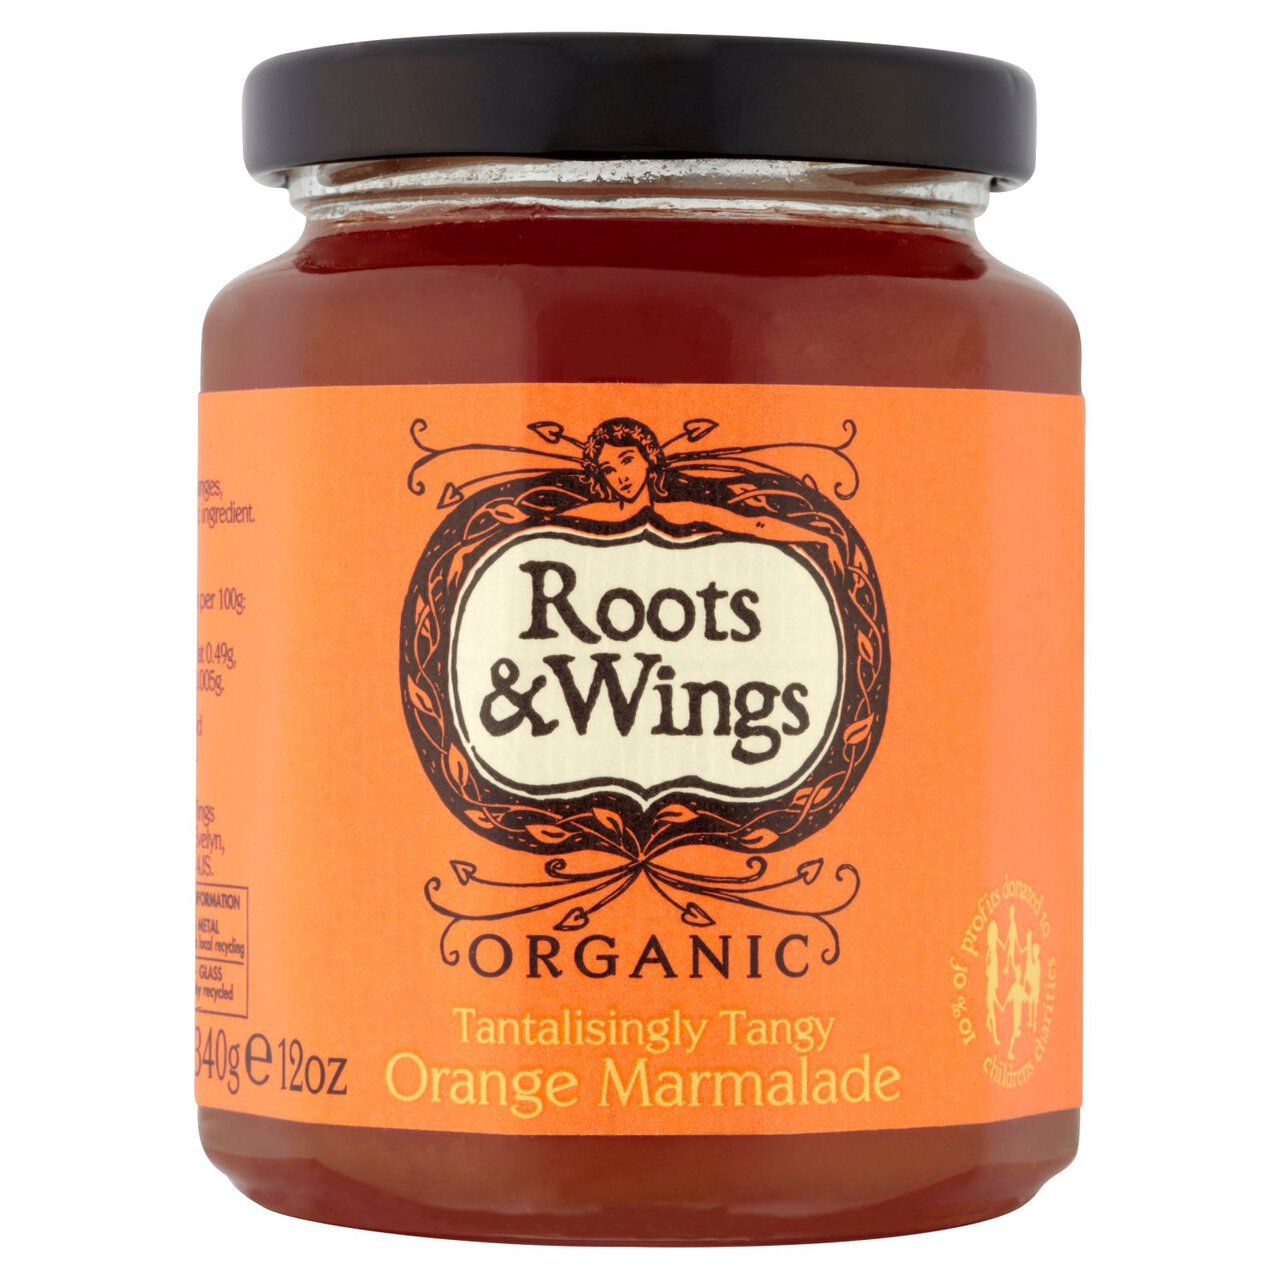 Roots & Wings Organic Seville Marmalade 300g